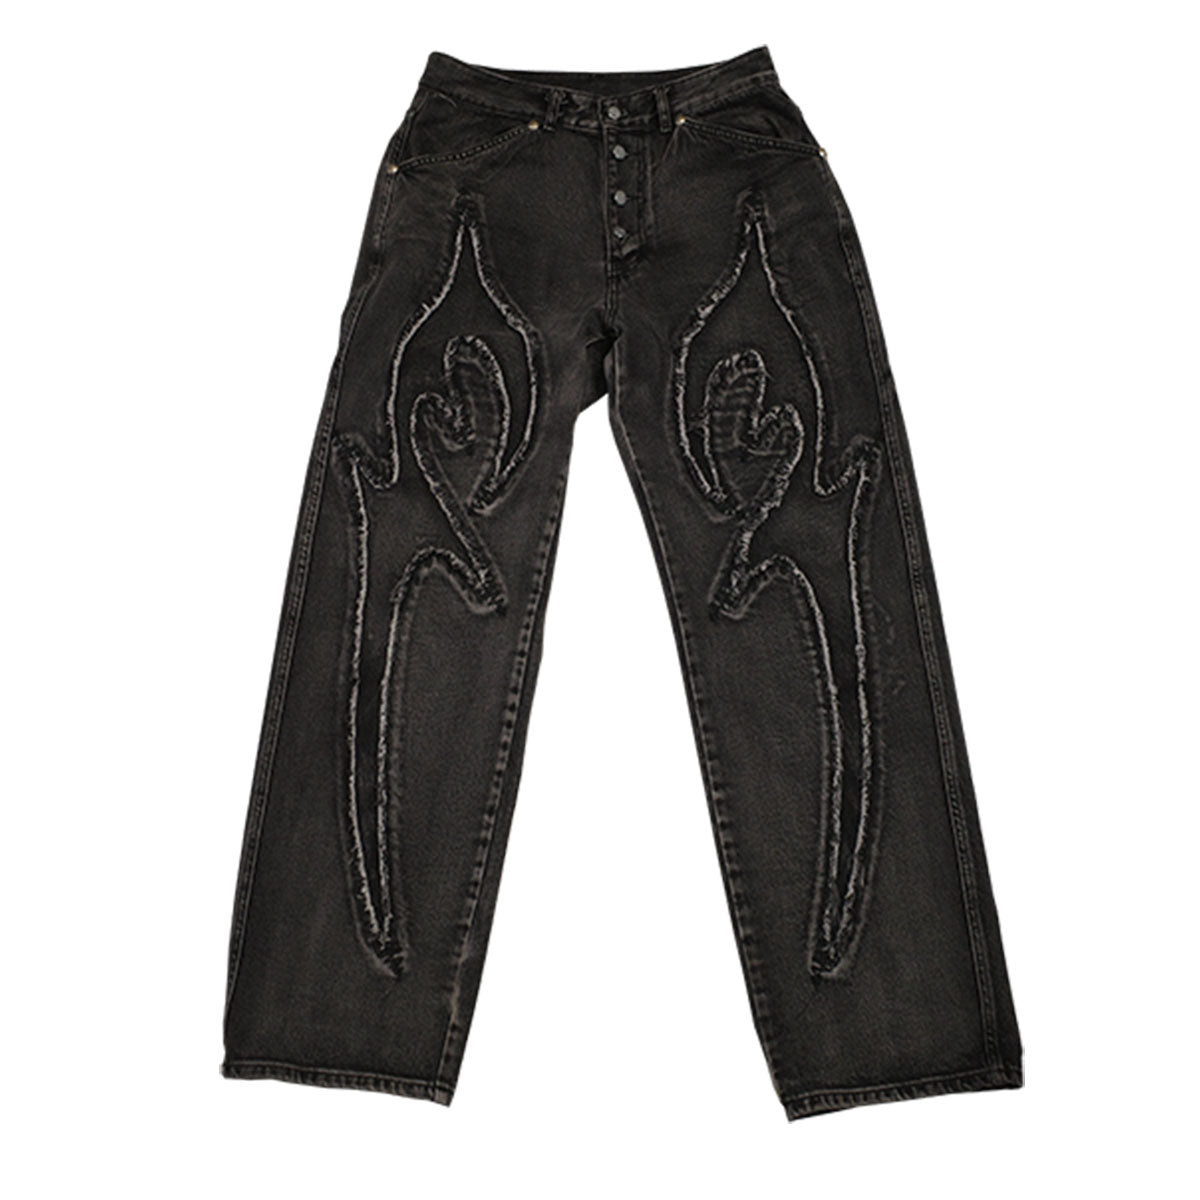 Tribal Denim Pant | Why are you here?